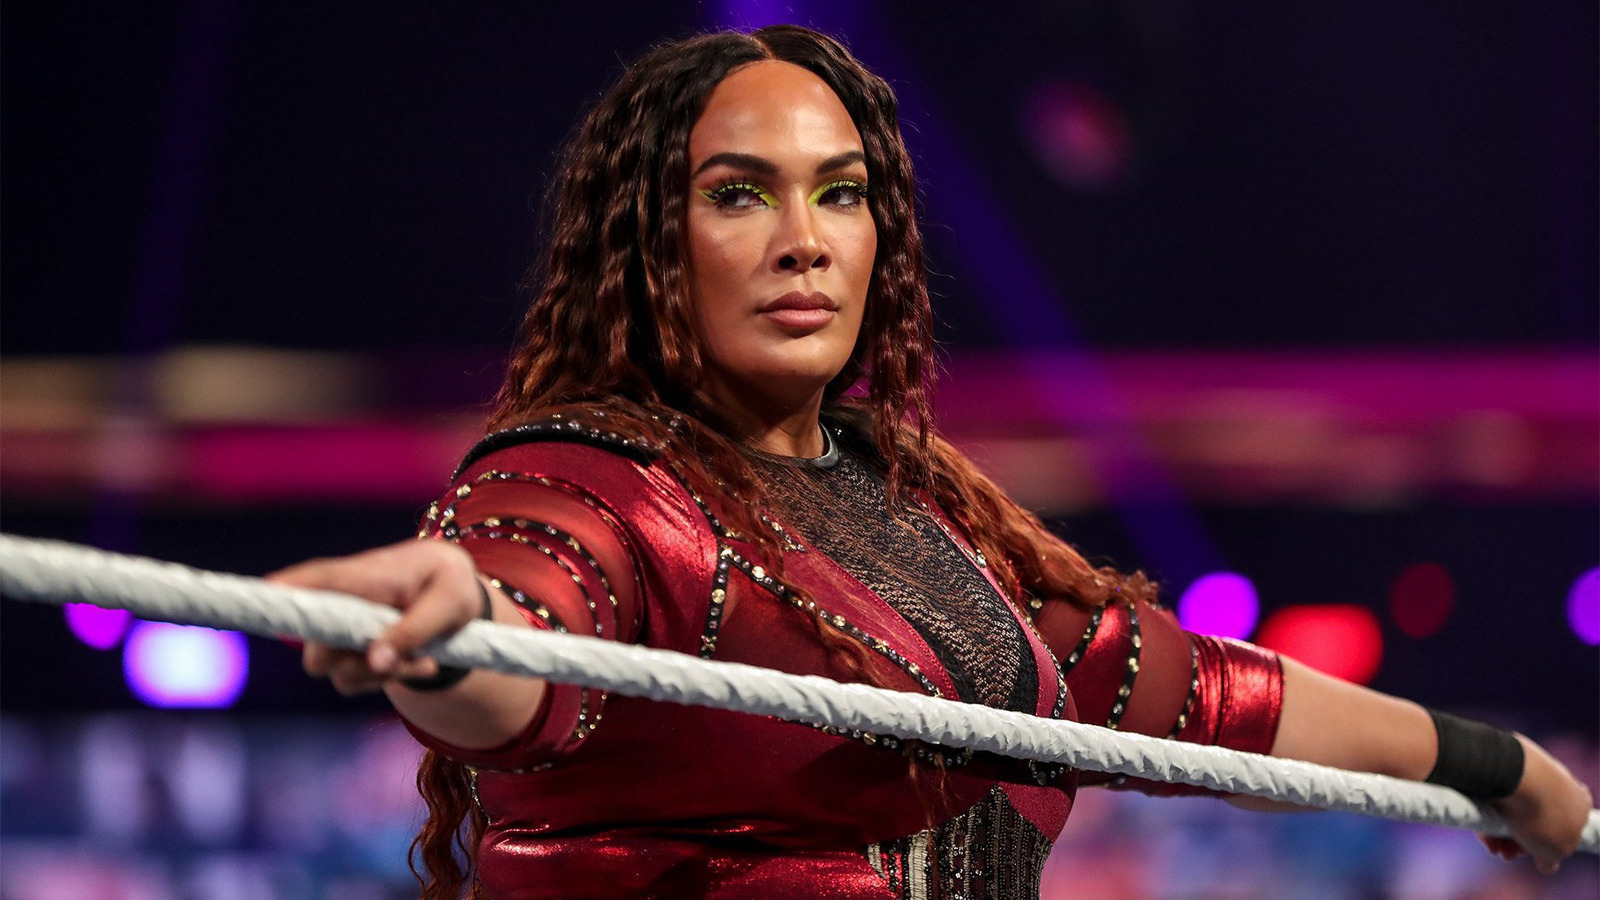 Nia Jax On Her Chances In WWE Royal Rumble, Whom She's Looking Forward